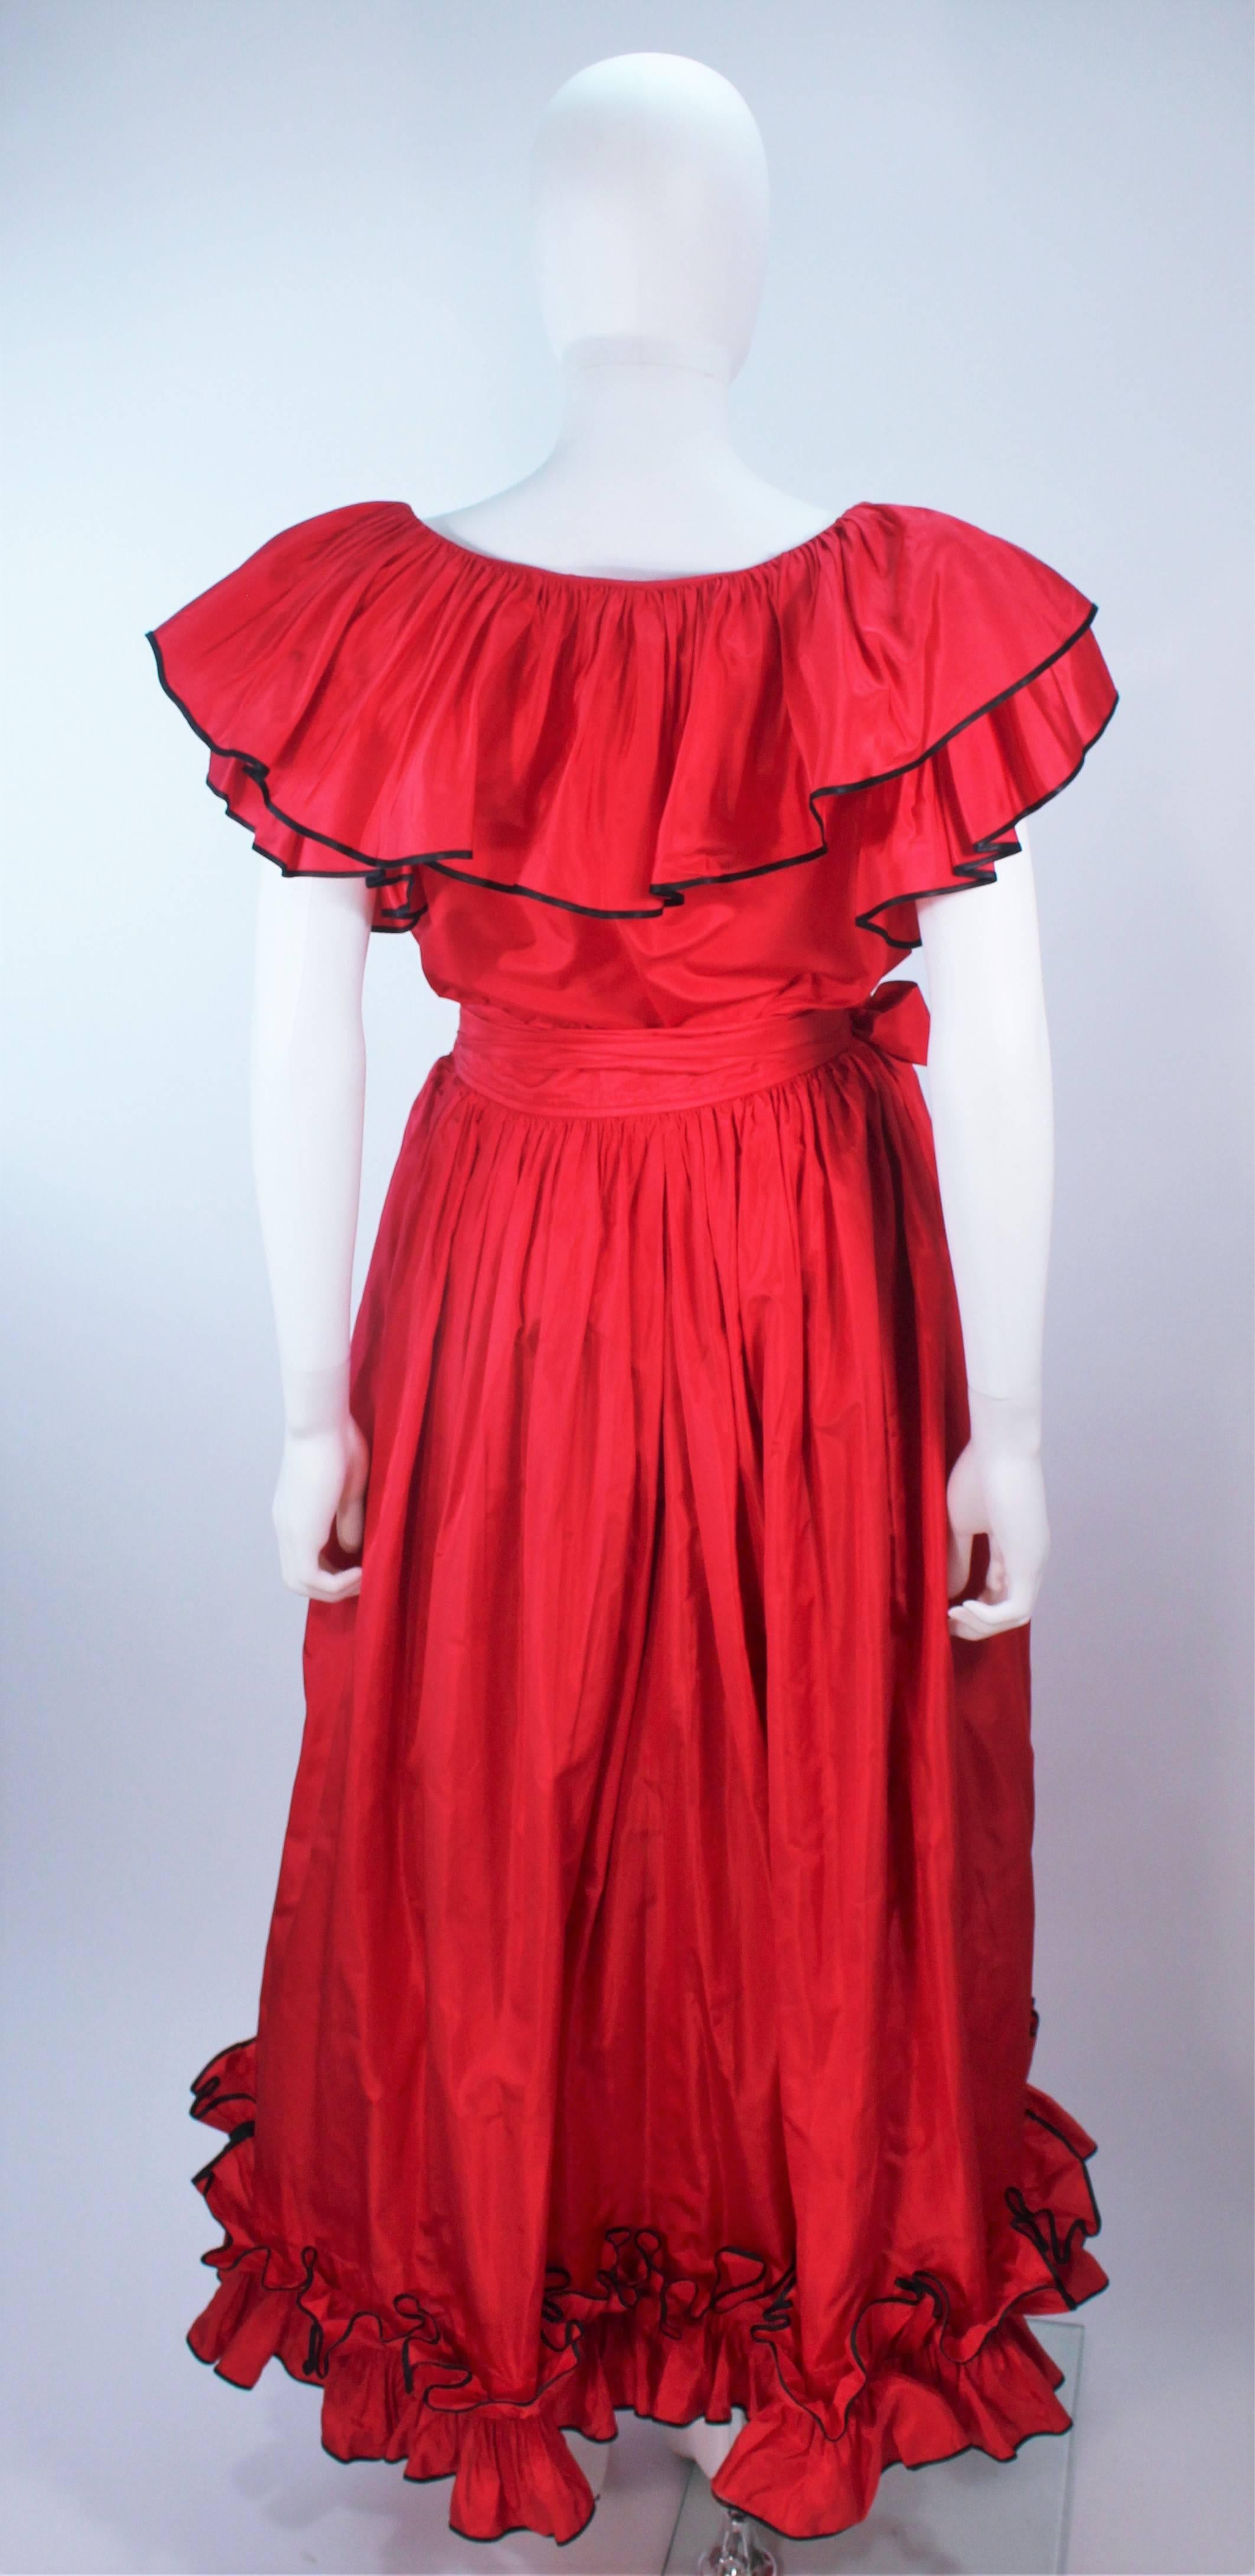 YVES SAINT LAURENT 1970's Red Satin Ruffled Ensemble with Black Trim Size 40 For Sale 2